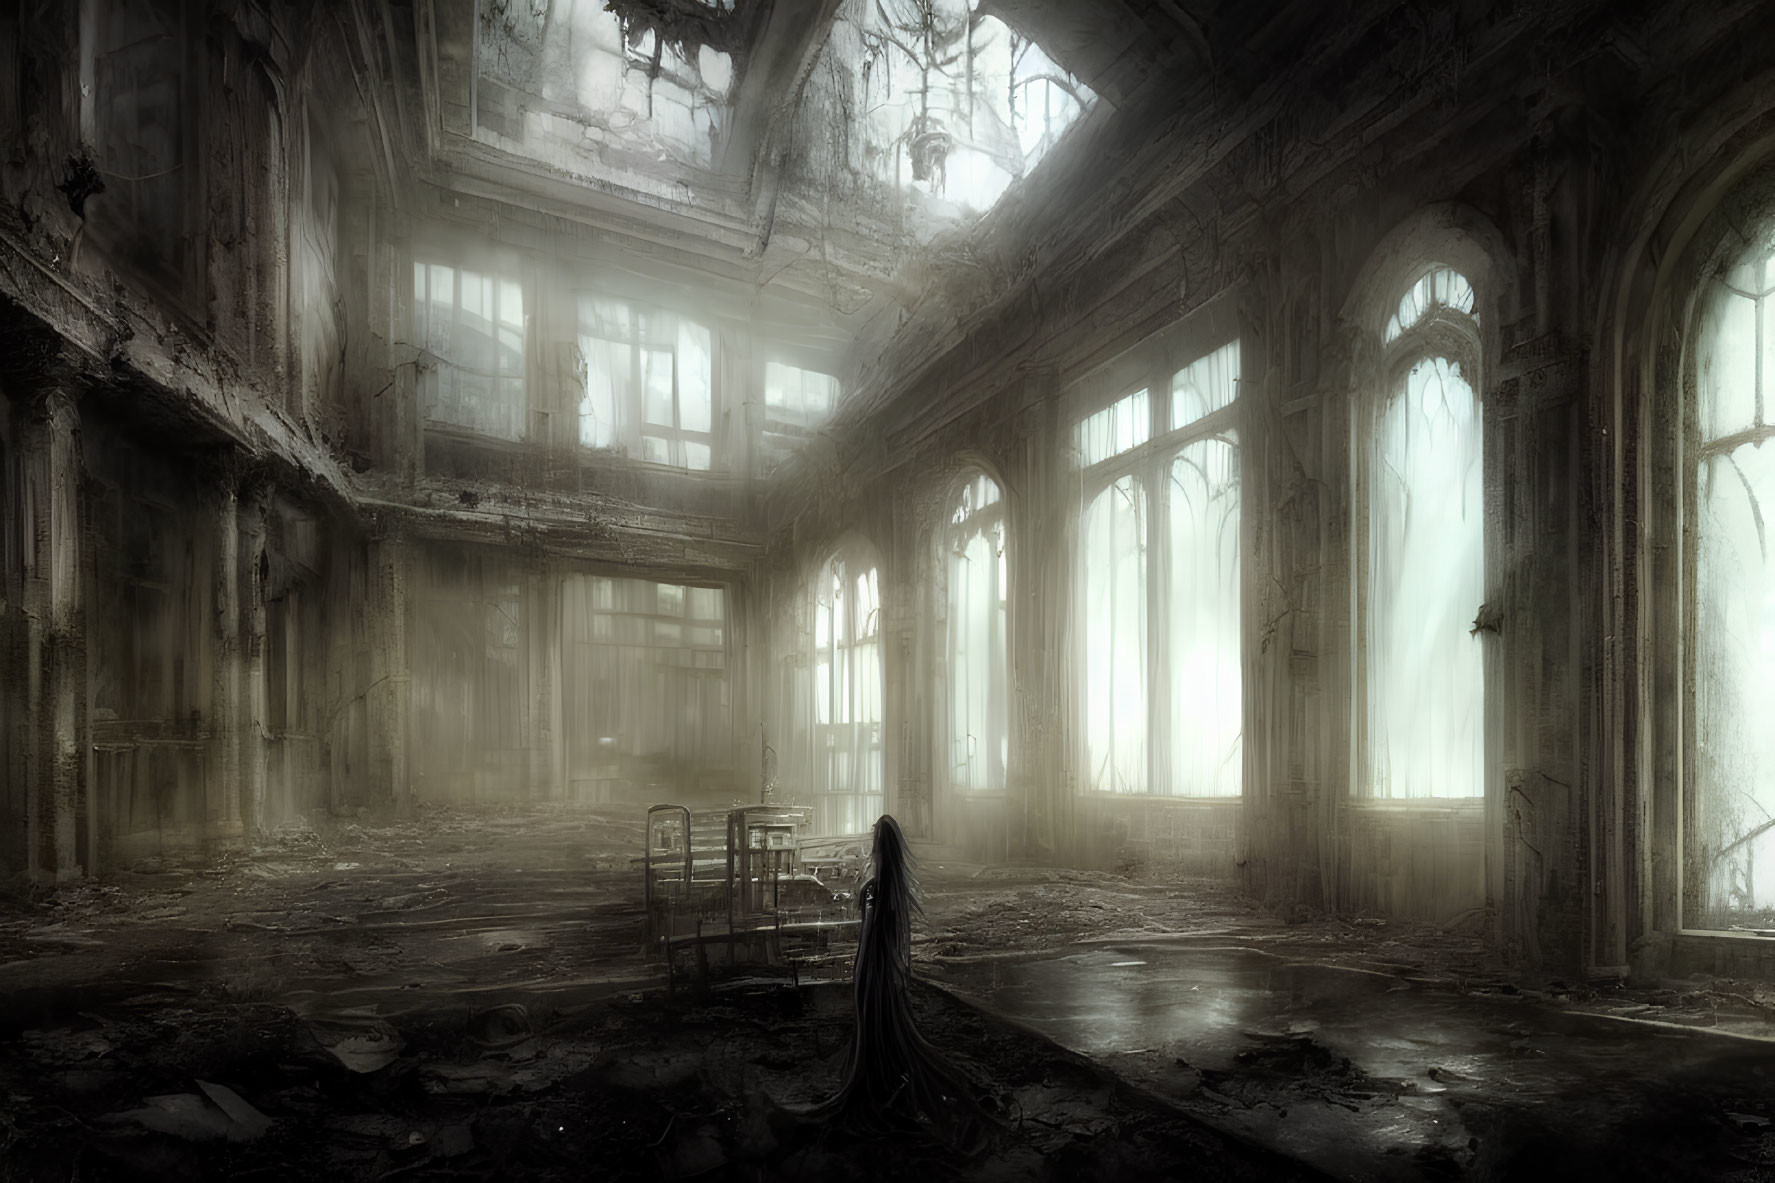 Grayscale image: Dilapidated grand hall with lone figure in dark cloak